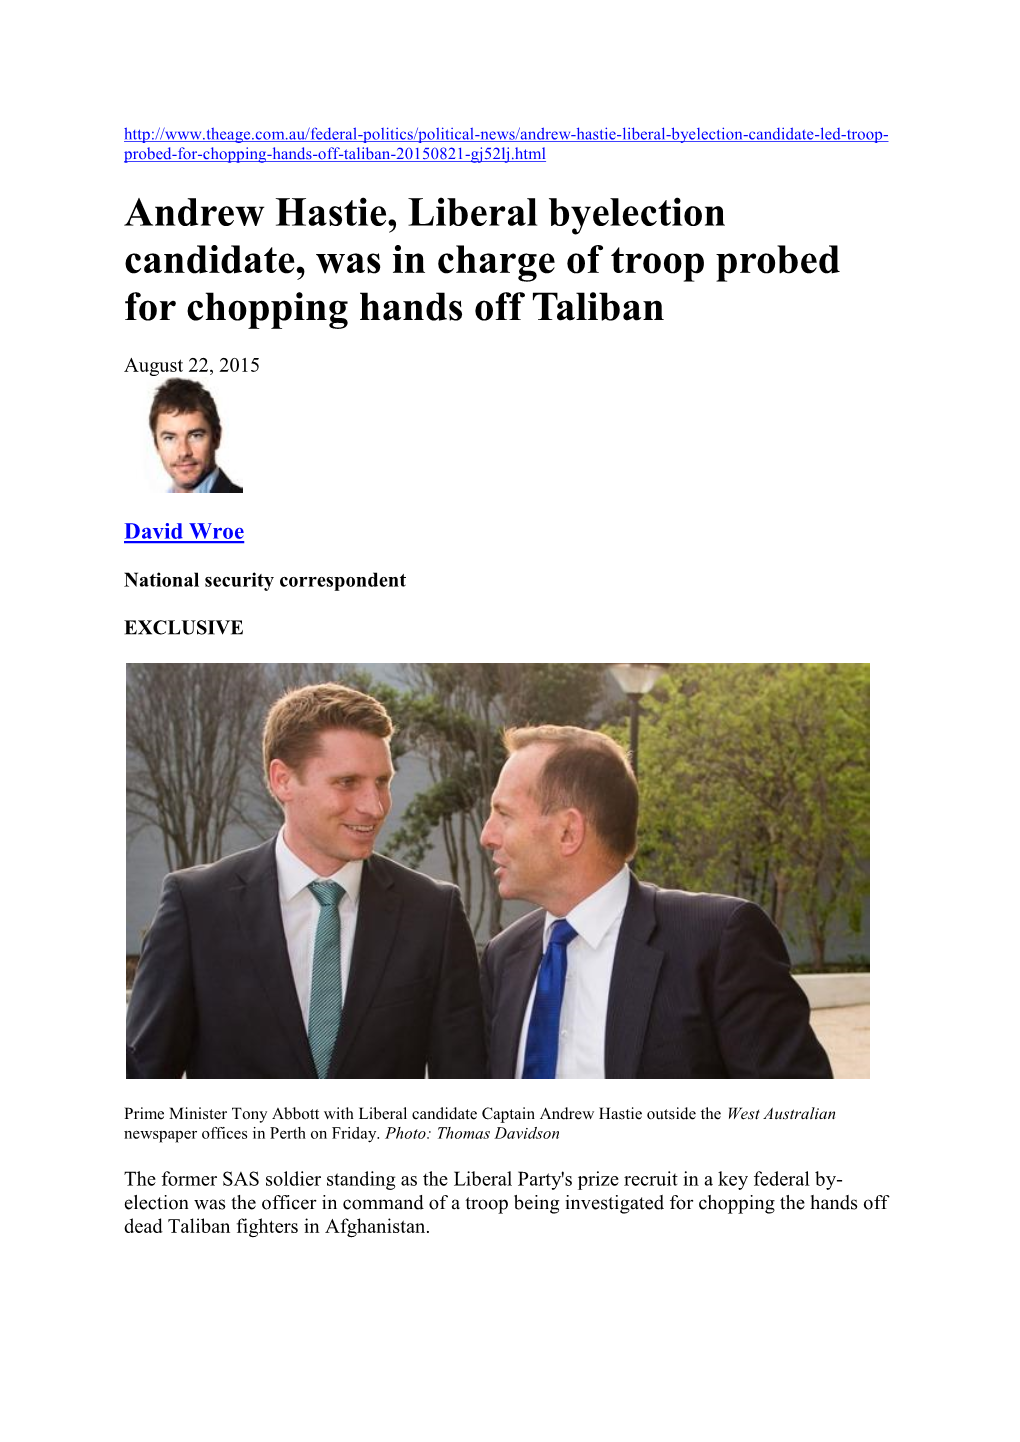 Andrew Hastie, Liberal Byelection Candidate, Was in Charge of Troop Probed for Chopping Hands Off Taliban